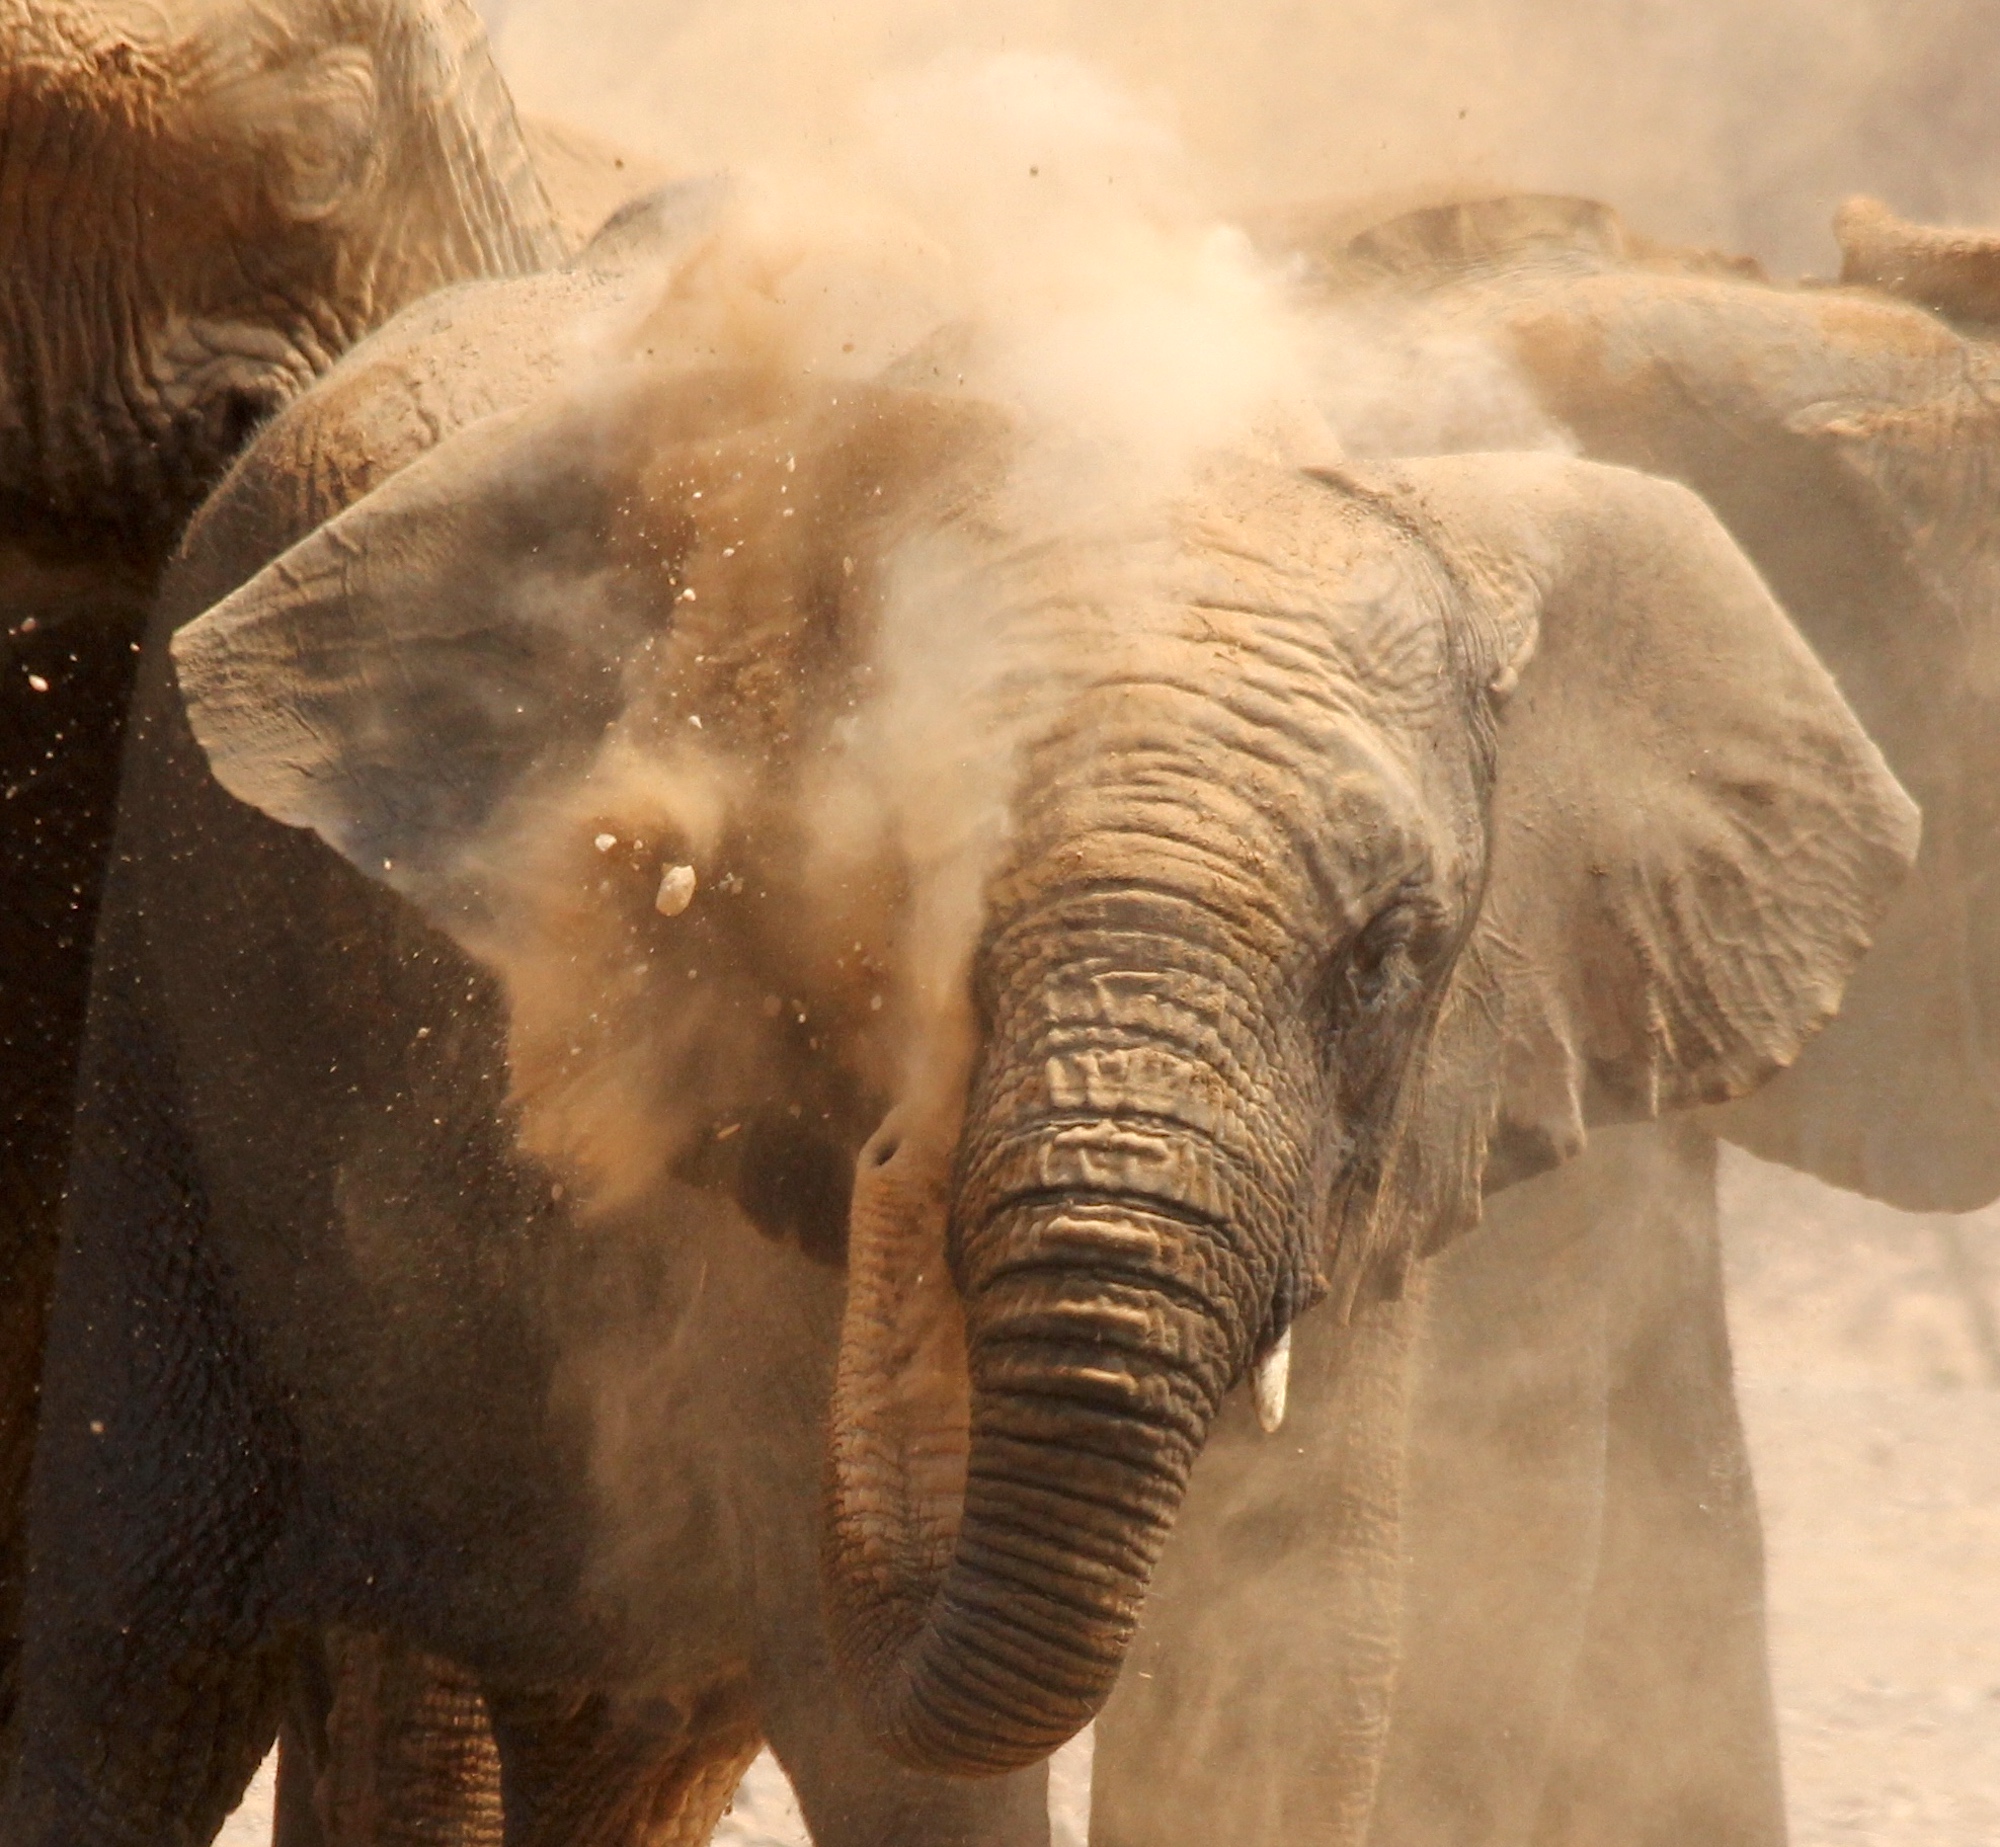 A elephant shaking dust from its head.